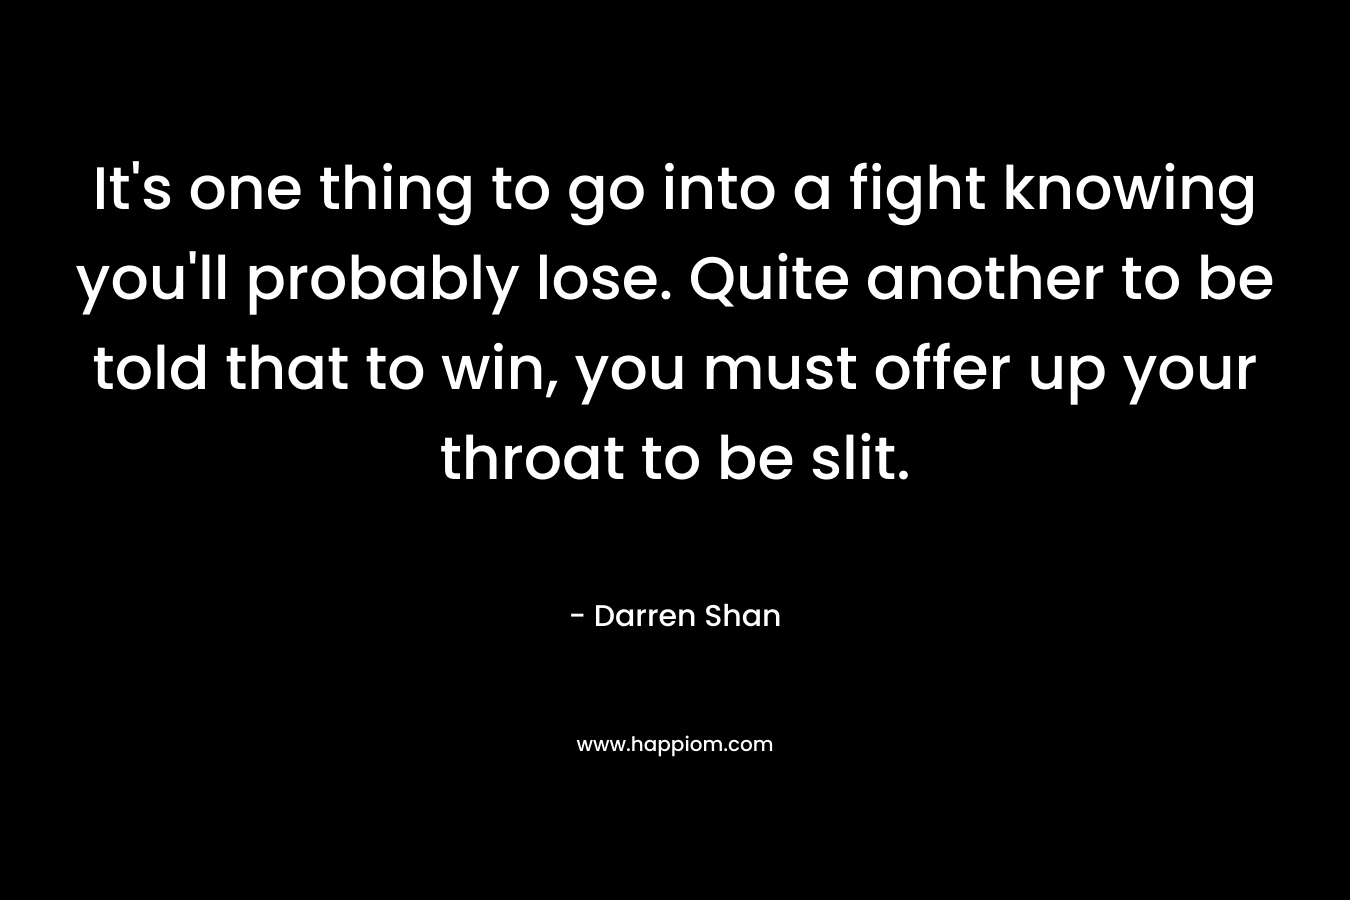 It’s one thing to go into a fight knowing you’ll probably lose. Quite another to be told that to win, you must offer up your throat to be slit. – Darren Shan